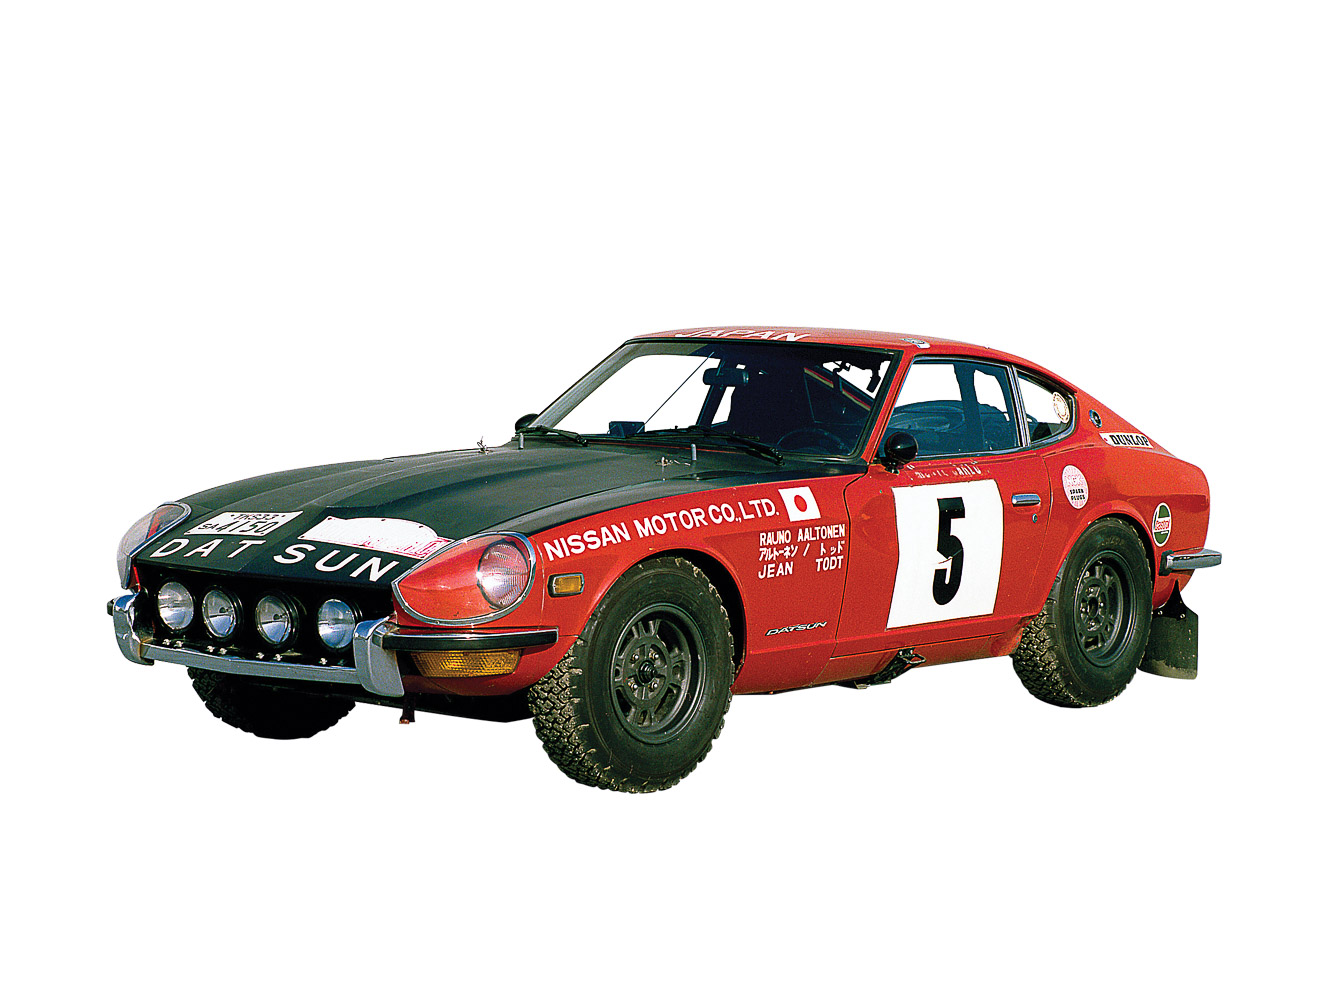 The 240Z was also a successful rally car